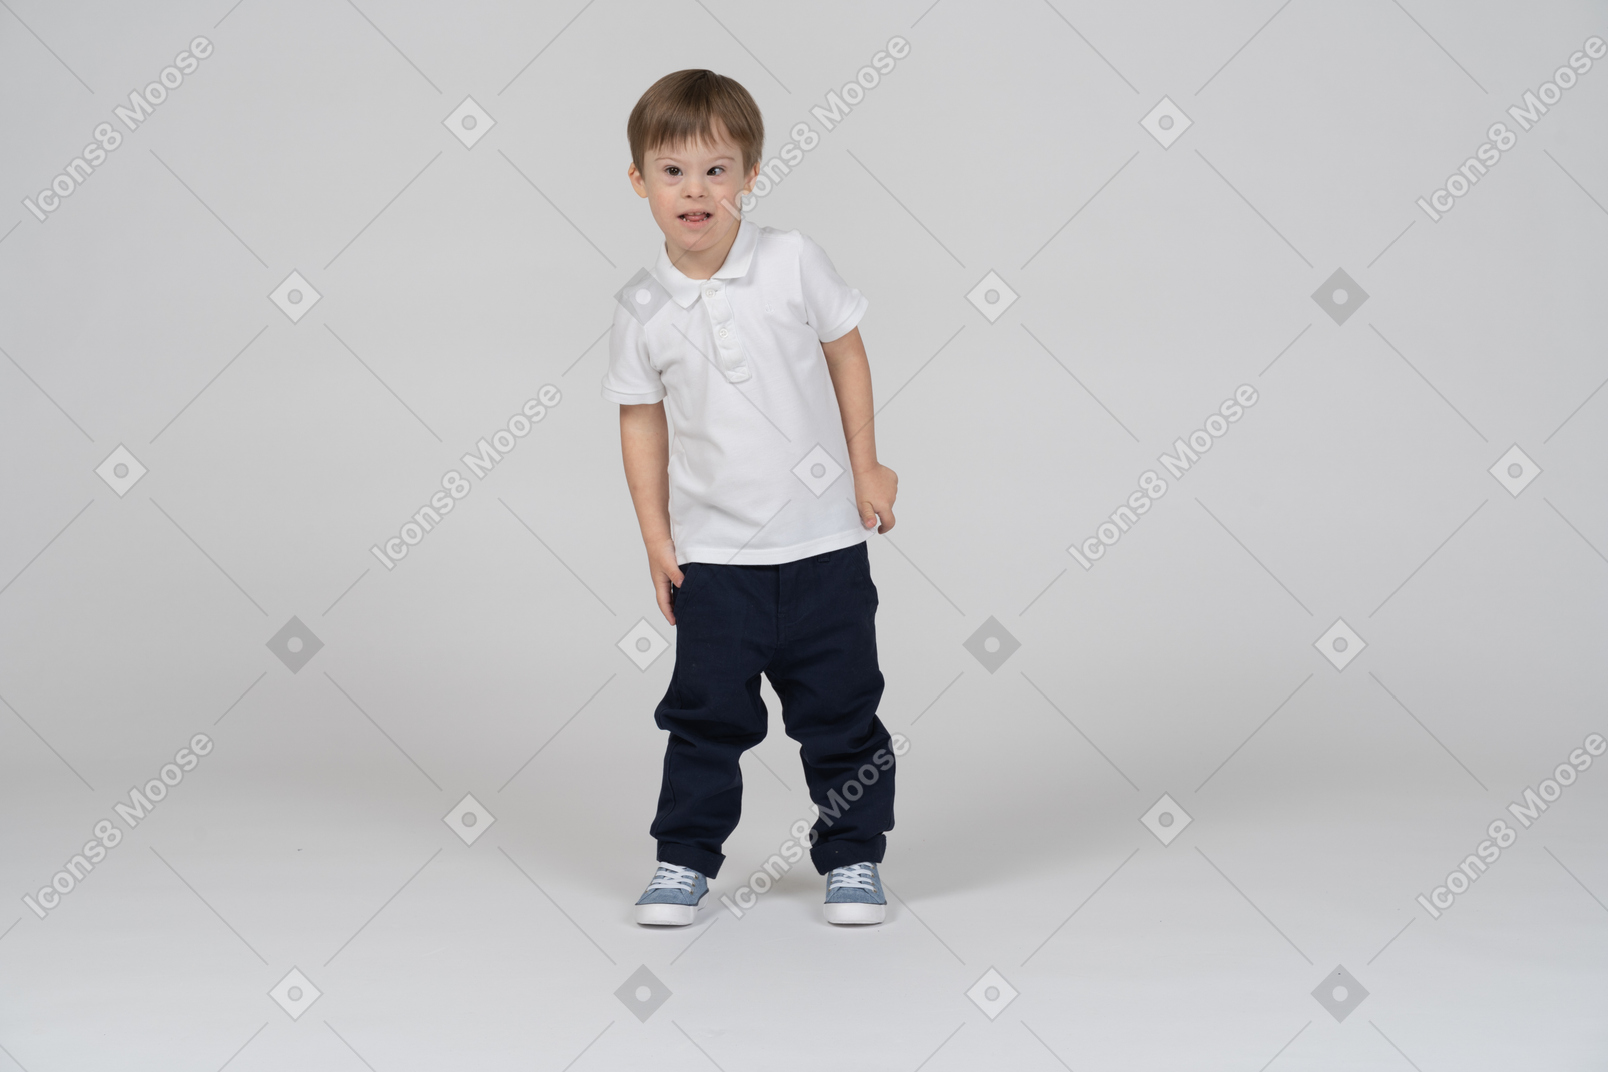 Front view of a boy looking to the side curiously